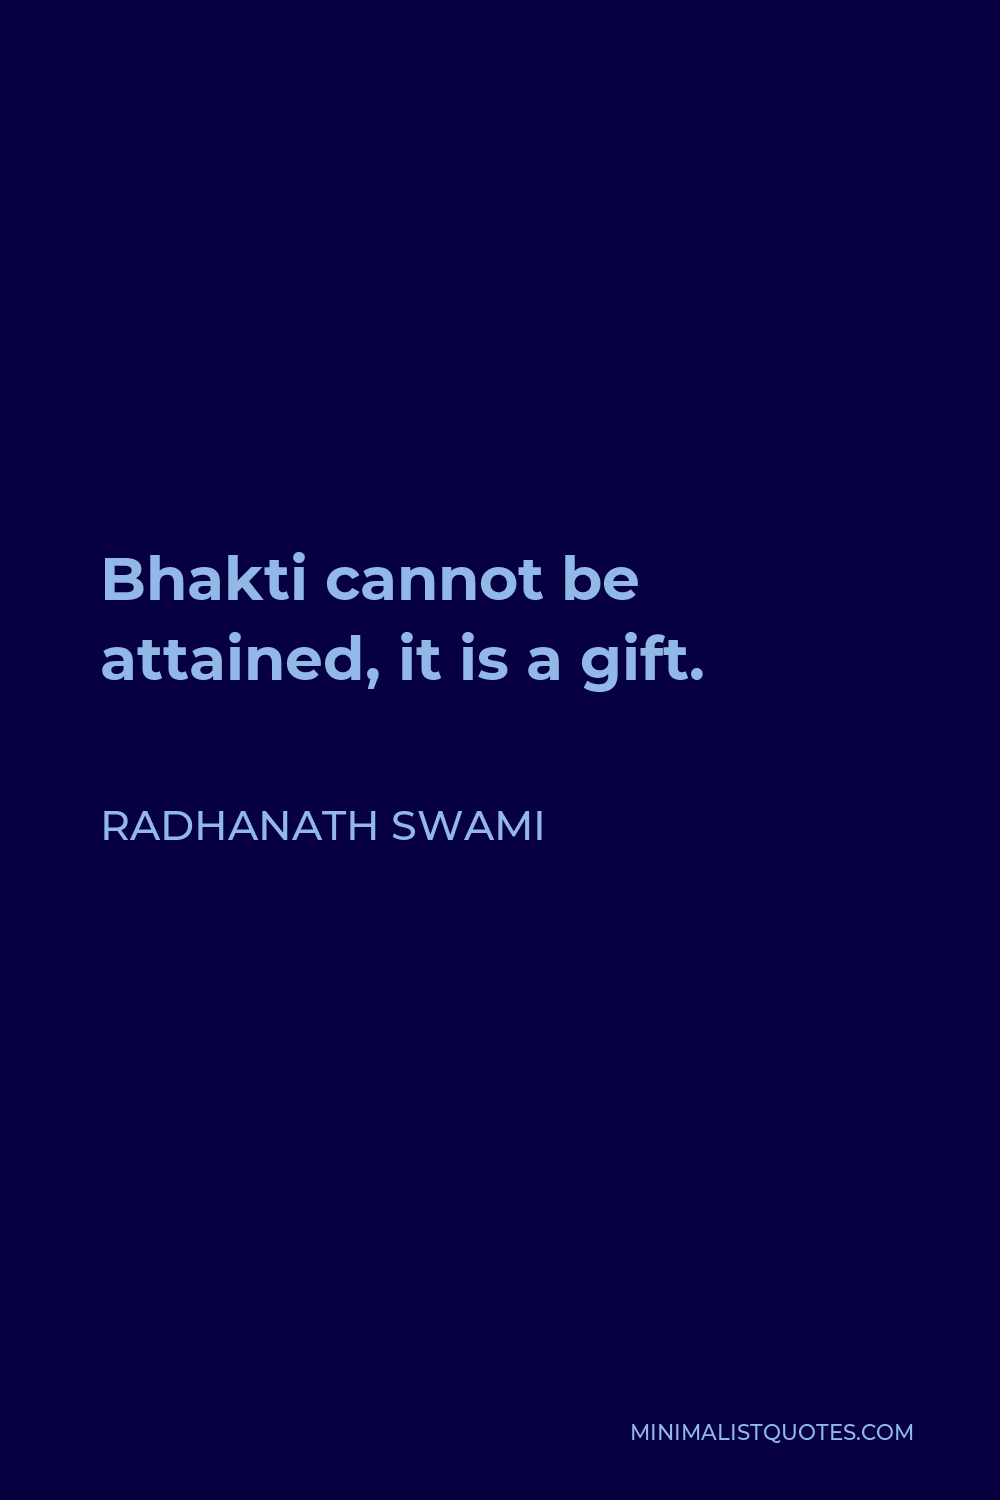 Radhanath Swami Quote - Bhakti cannot be attained, it is a gift.